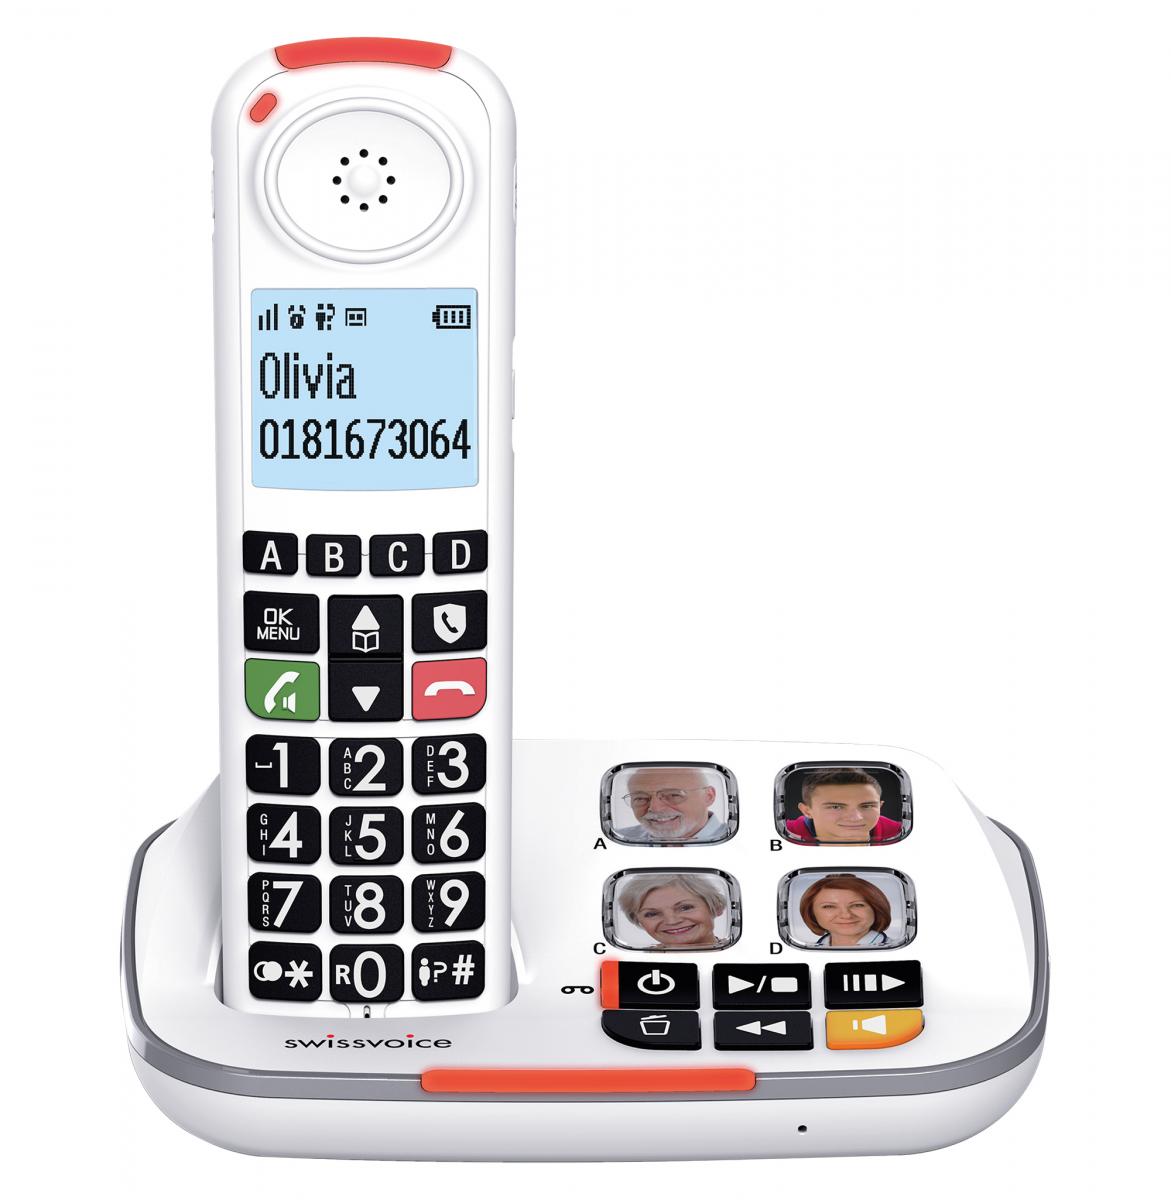 Picture of the Swissvoice Xtra 2355 set, the cordless phone supported by the base station